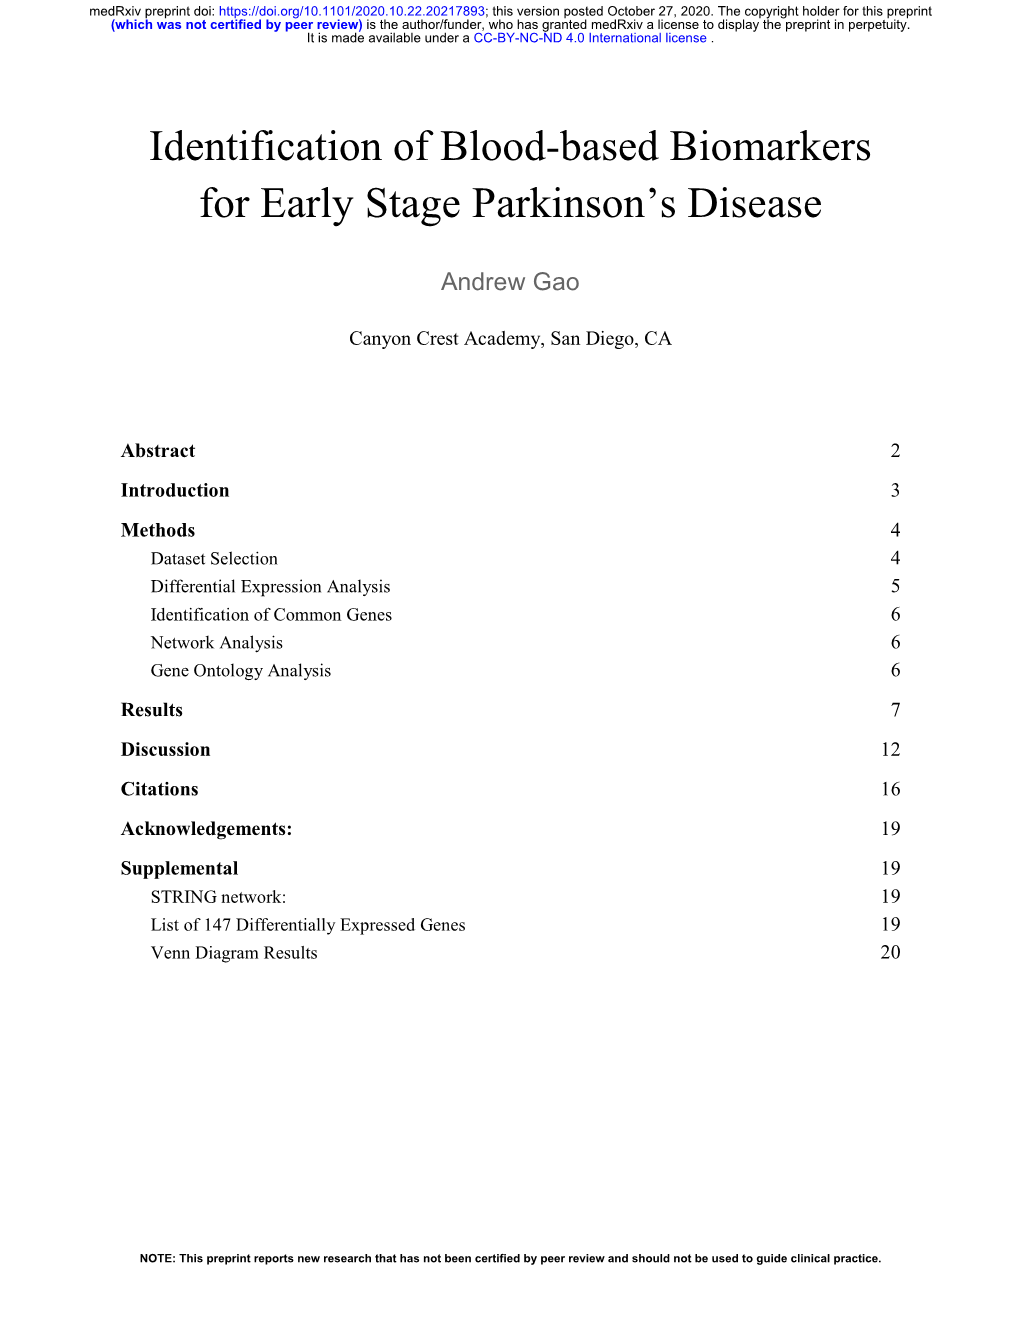 Identification of Blood-Based Biomarkers for Early Stage Parkinson’S Disease